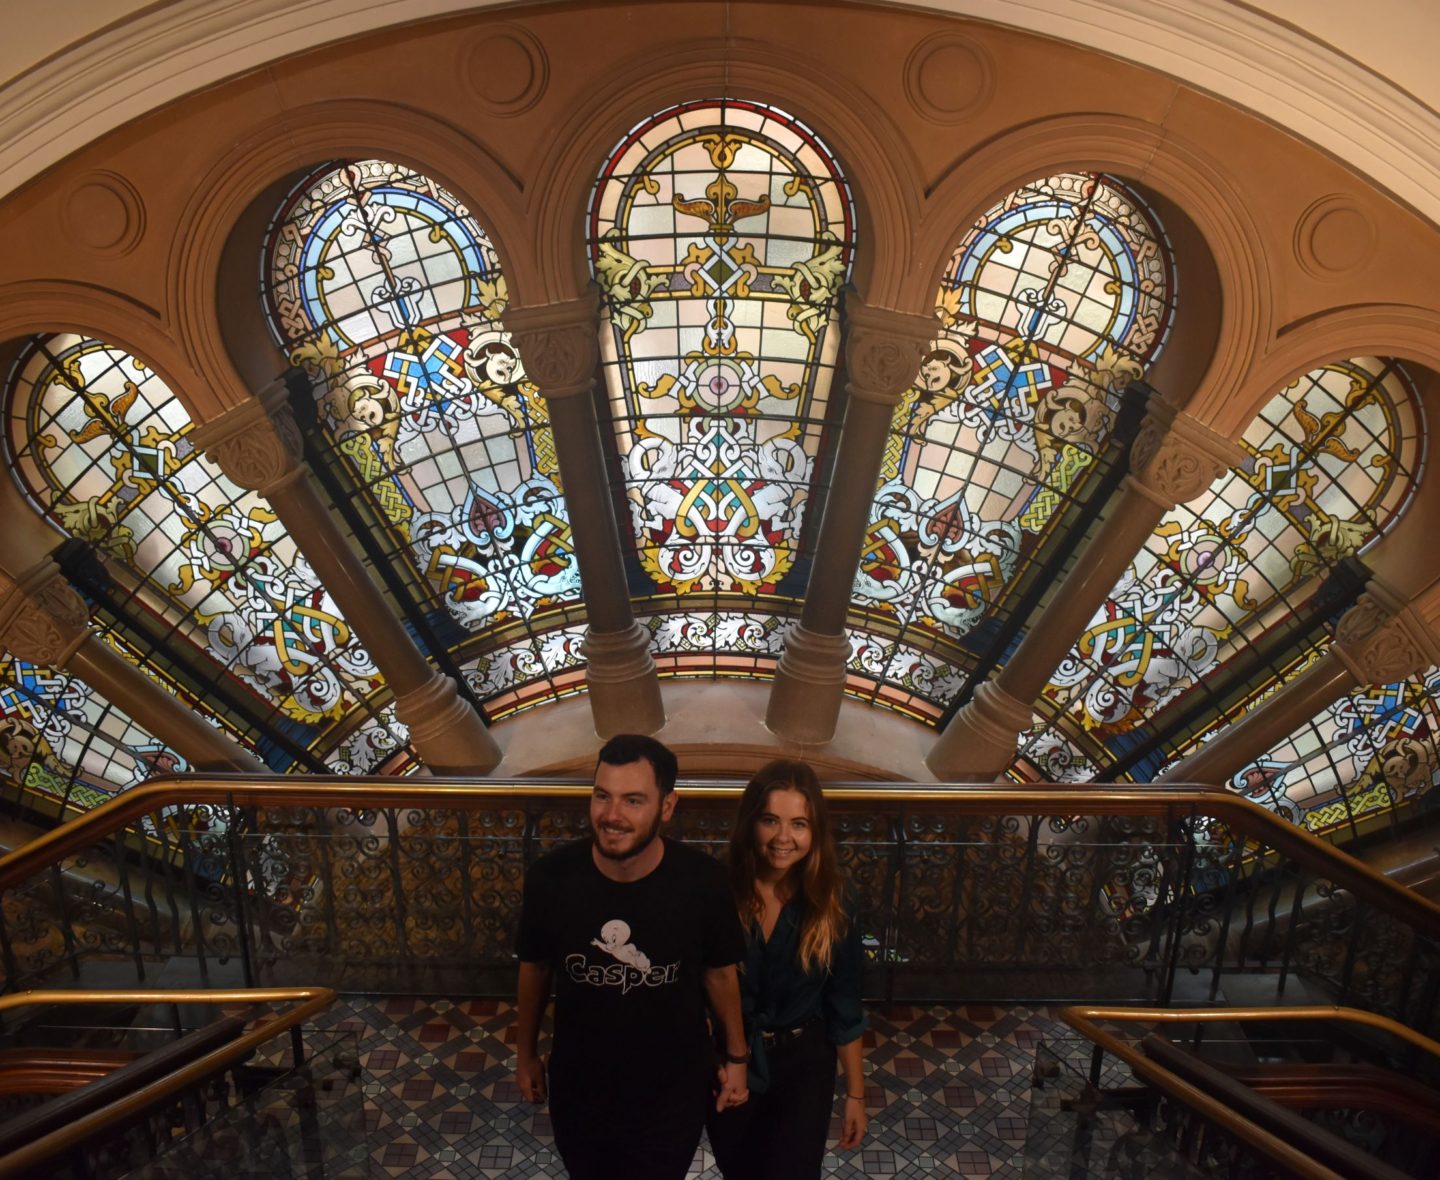 Most Instagrammable places in Sydney, Queen Victoria Building